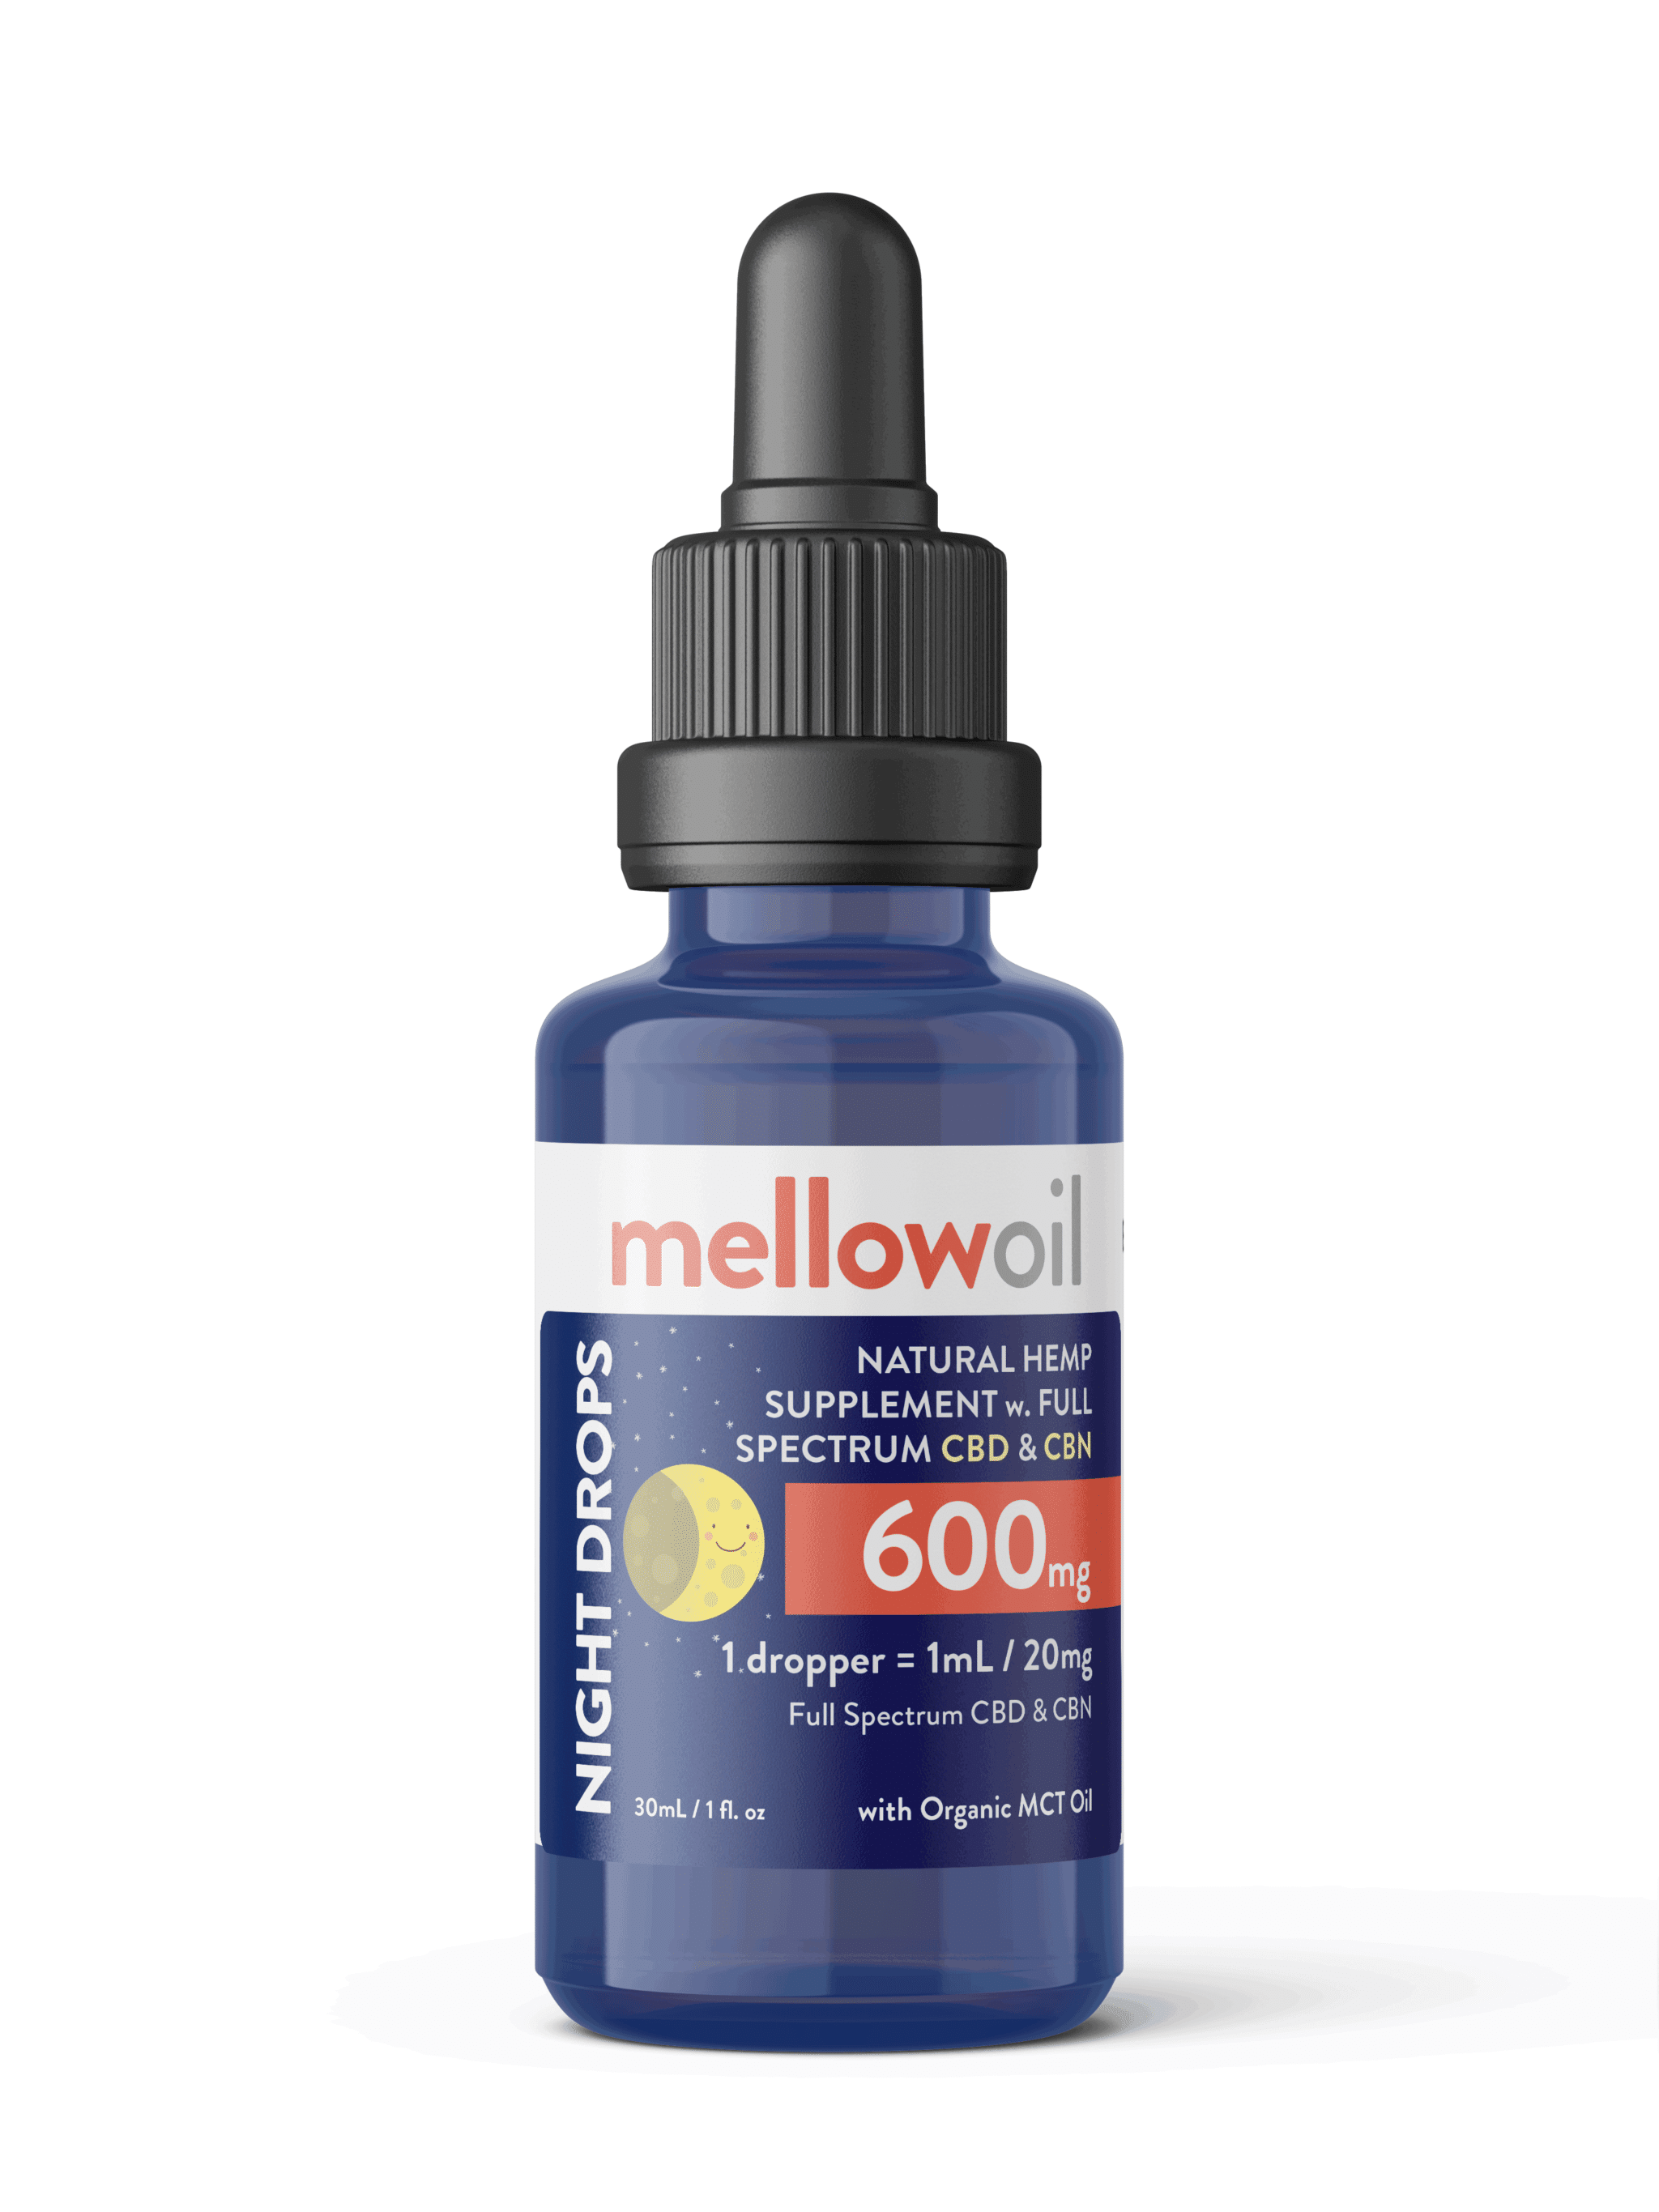 Mellow Oil NIGHT DROPS with 600mg with Full Spectrum CBD and CBN - Cannabinol / 20mg of ...